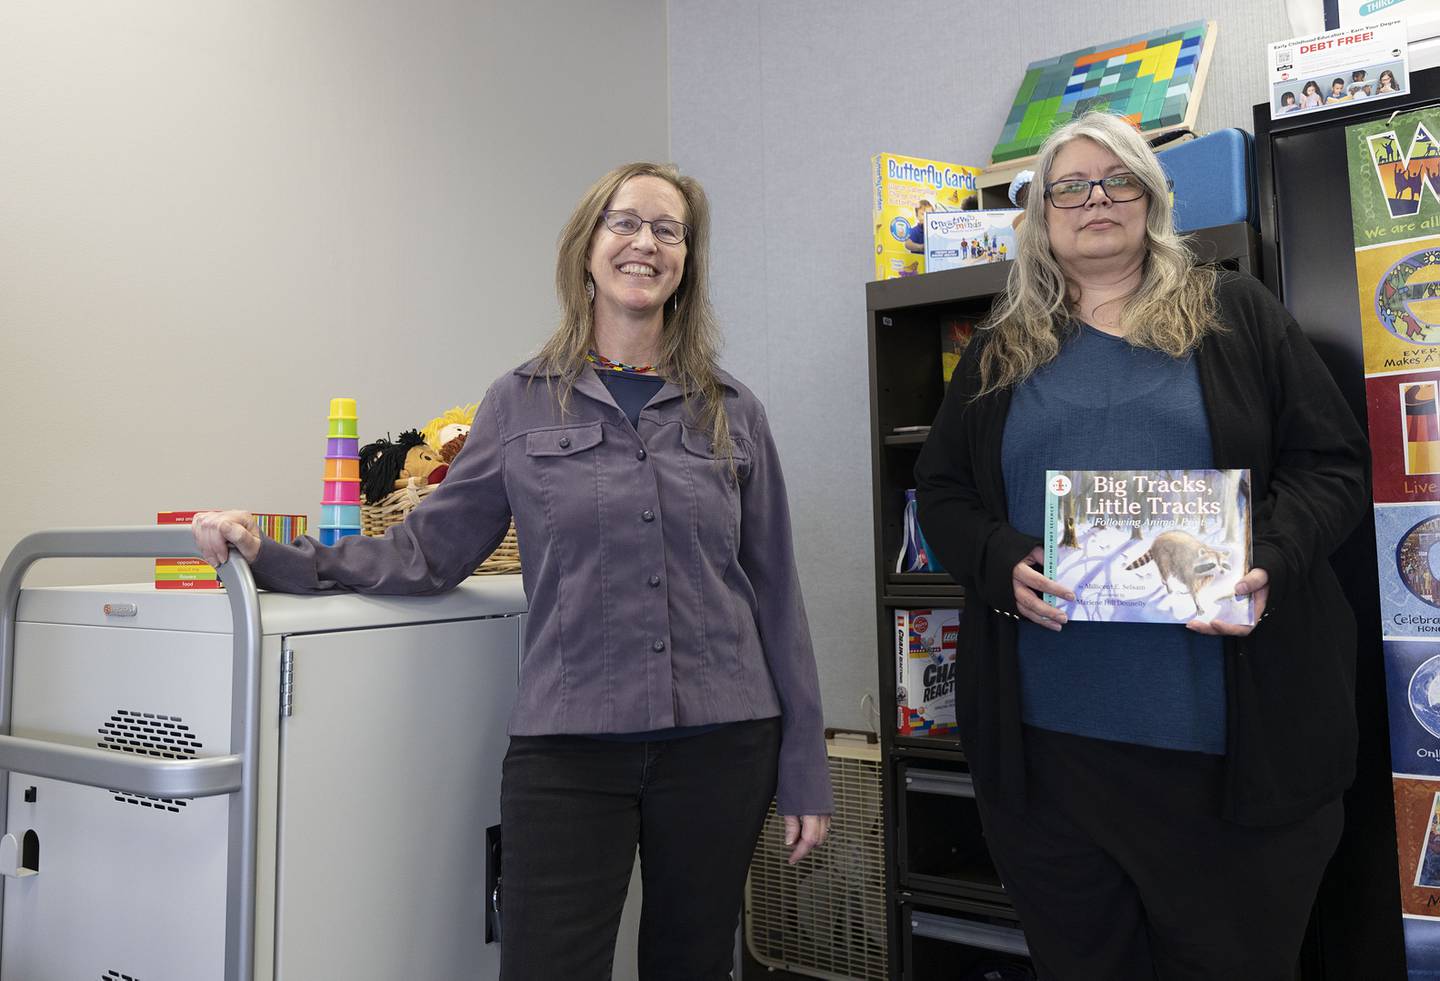 Sauk Valley College’s Assistant Professor of Early Childhood Education Beth Smaka (left) and Amanda Eichman, Professor of Education and English, lead the way for those looking to become teachers.